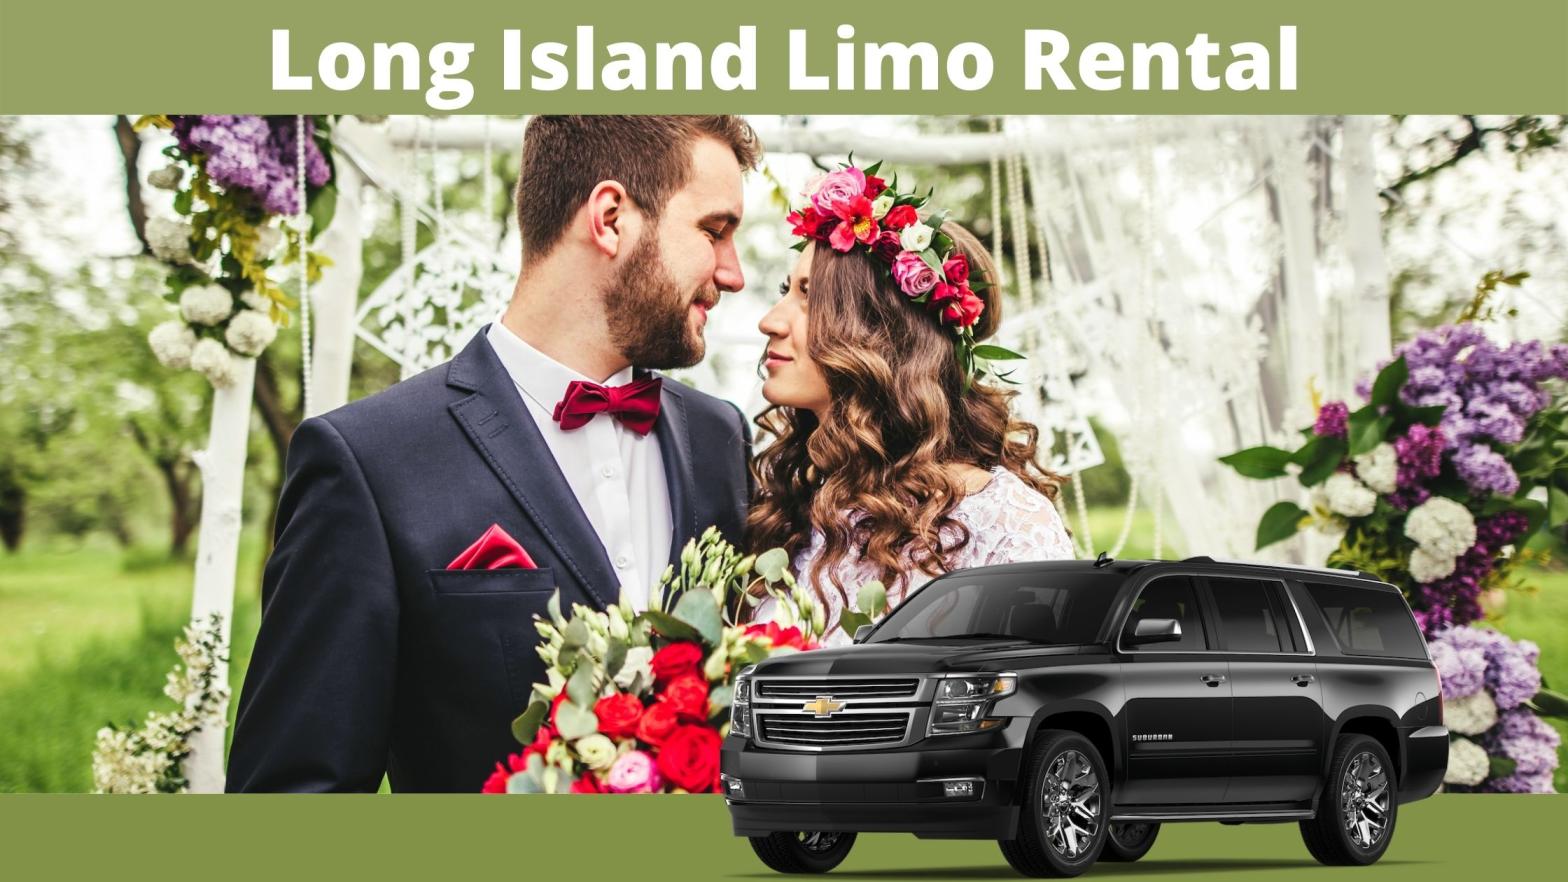 Hiring a Limo for Your Wedding in Long Island Limo rental